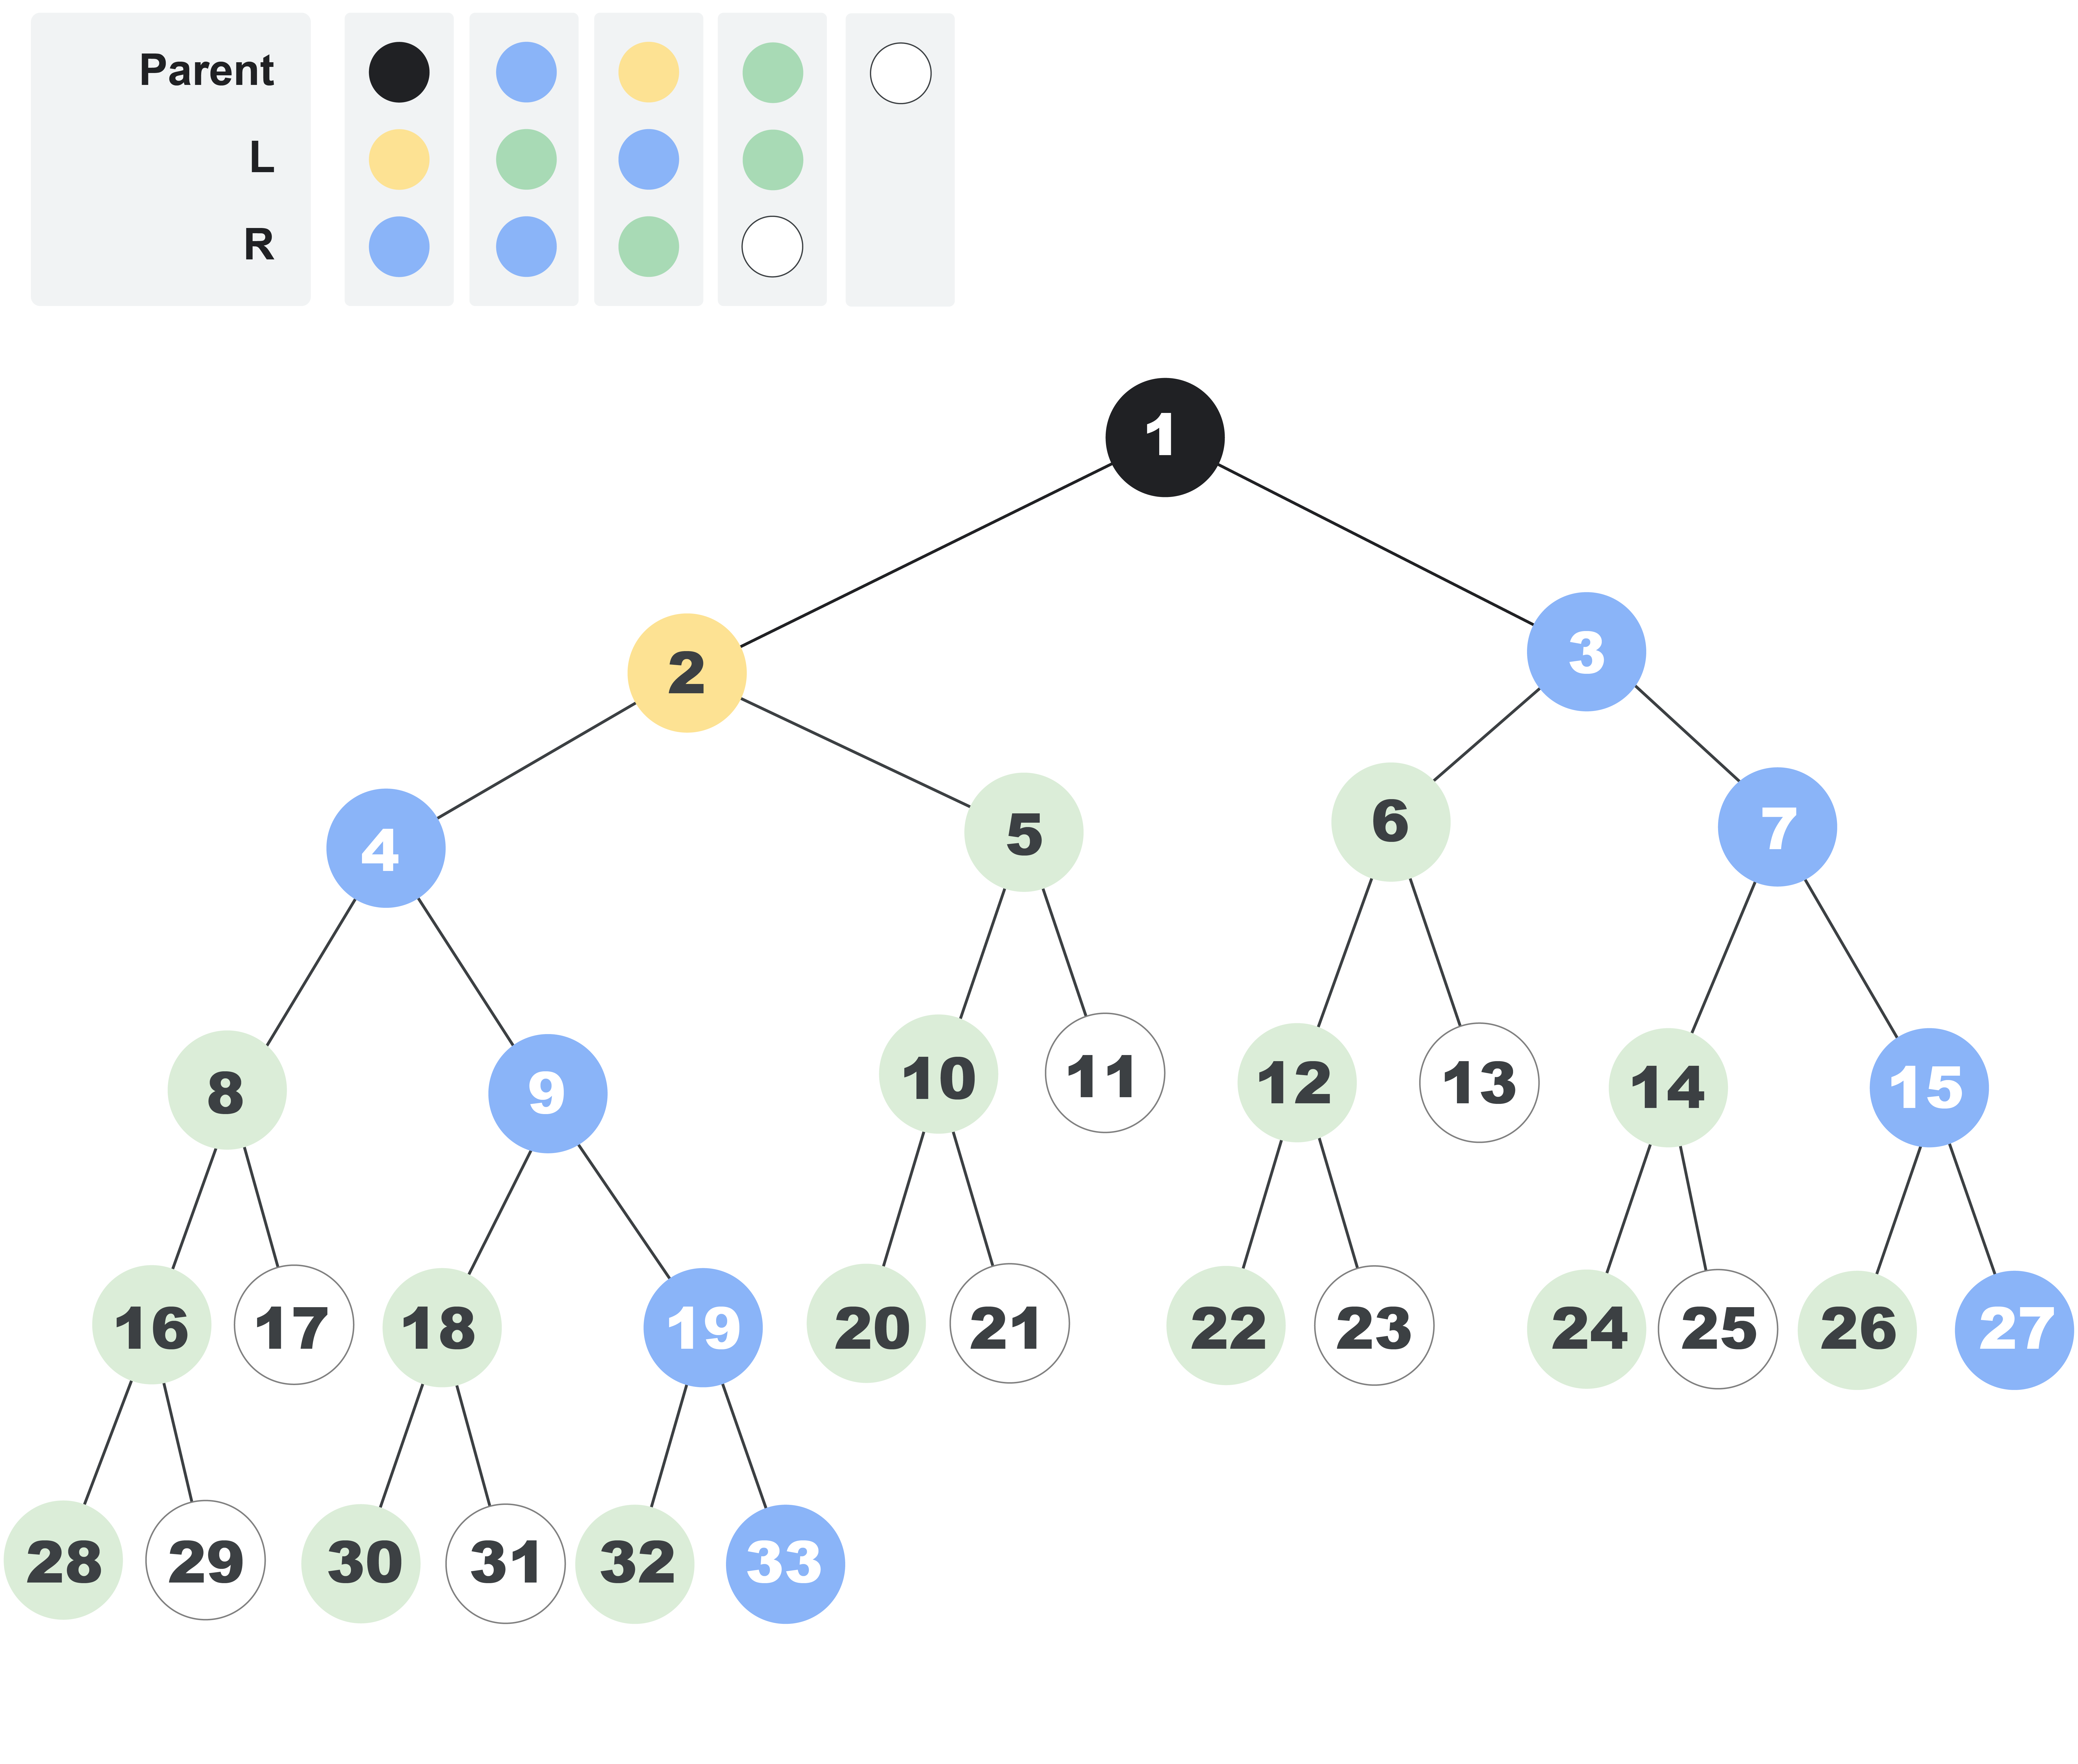 An infinite tree with colored and indexed nodes